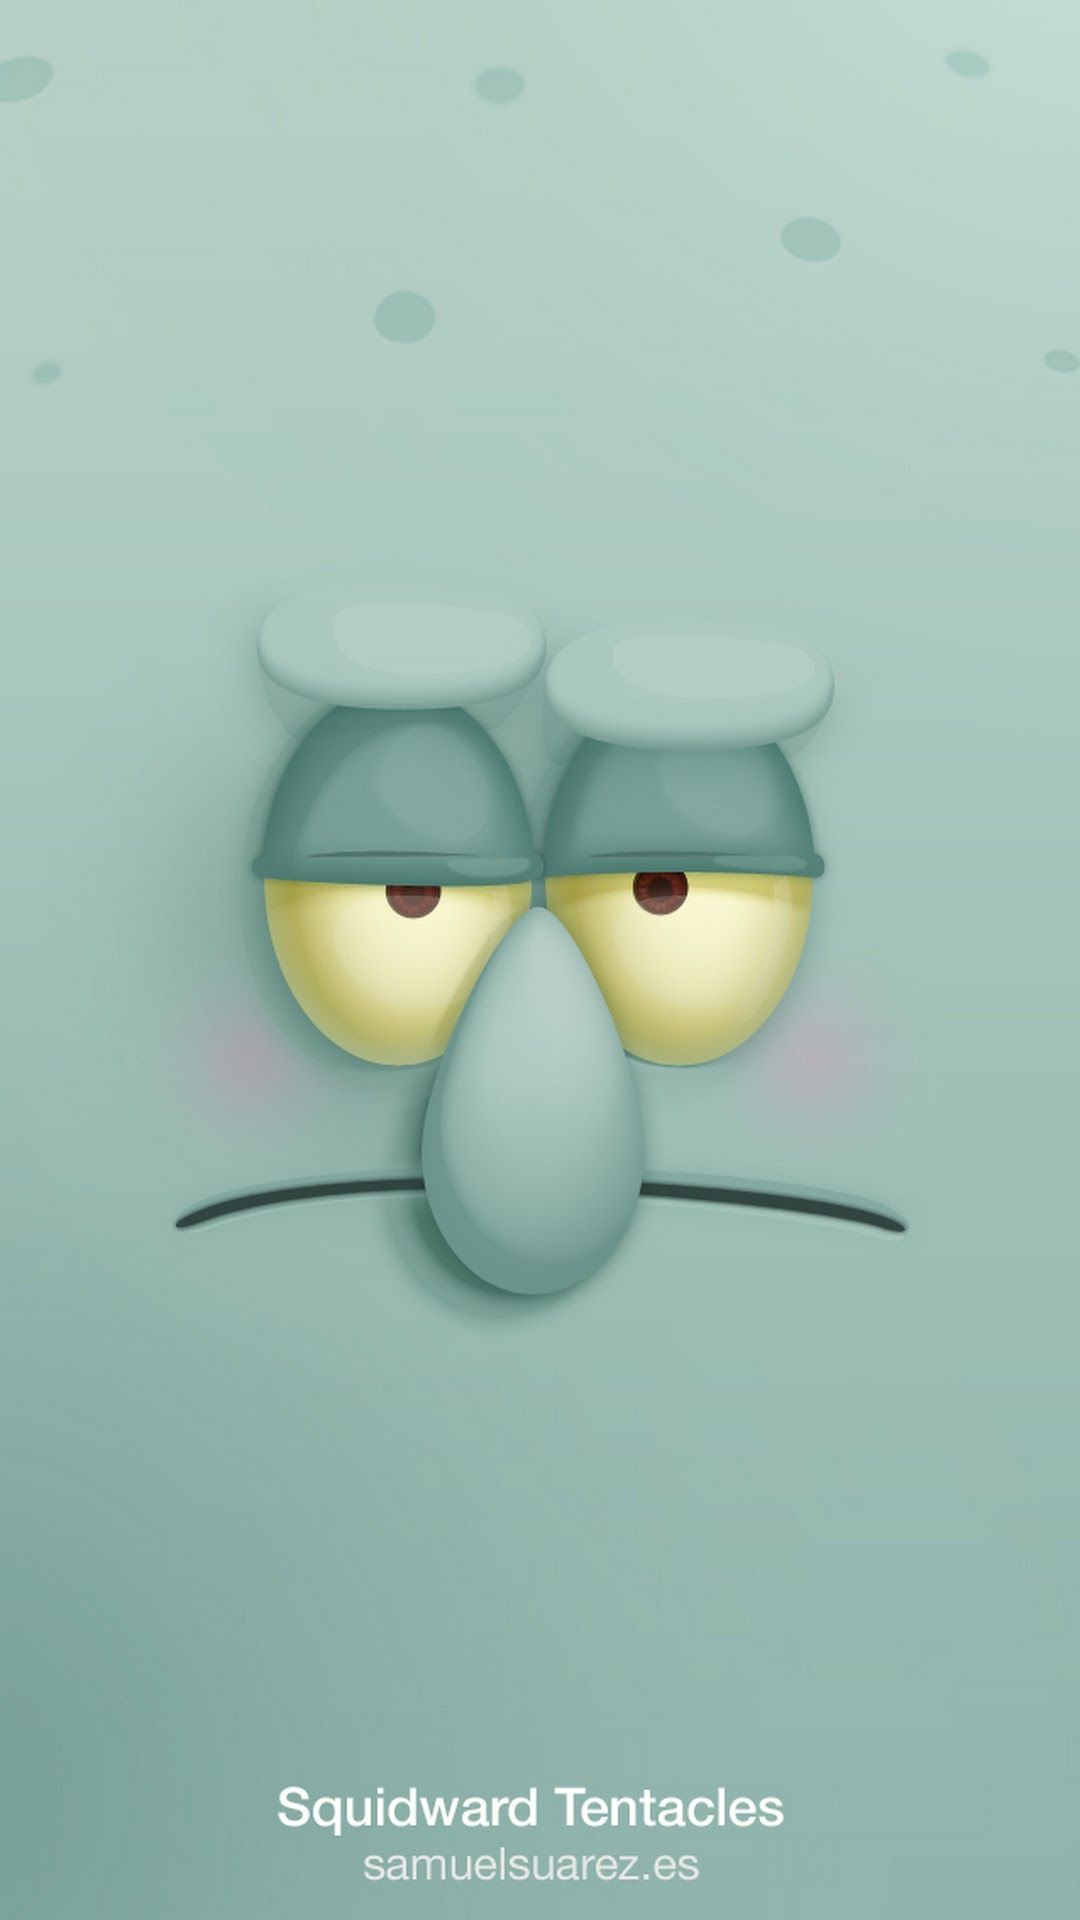 Iphone wallpaper with a picture of Squidward from Spongebob - Squidward